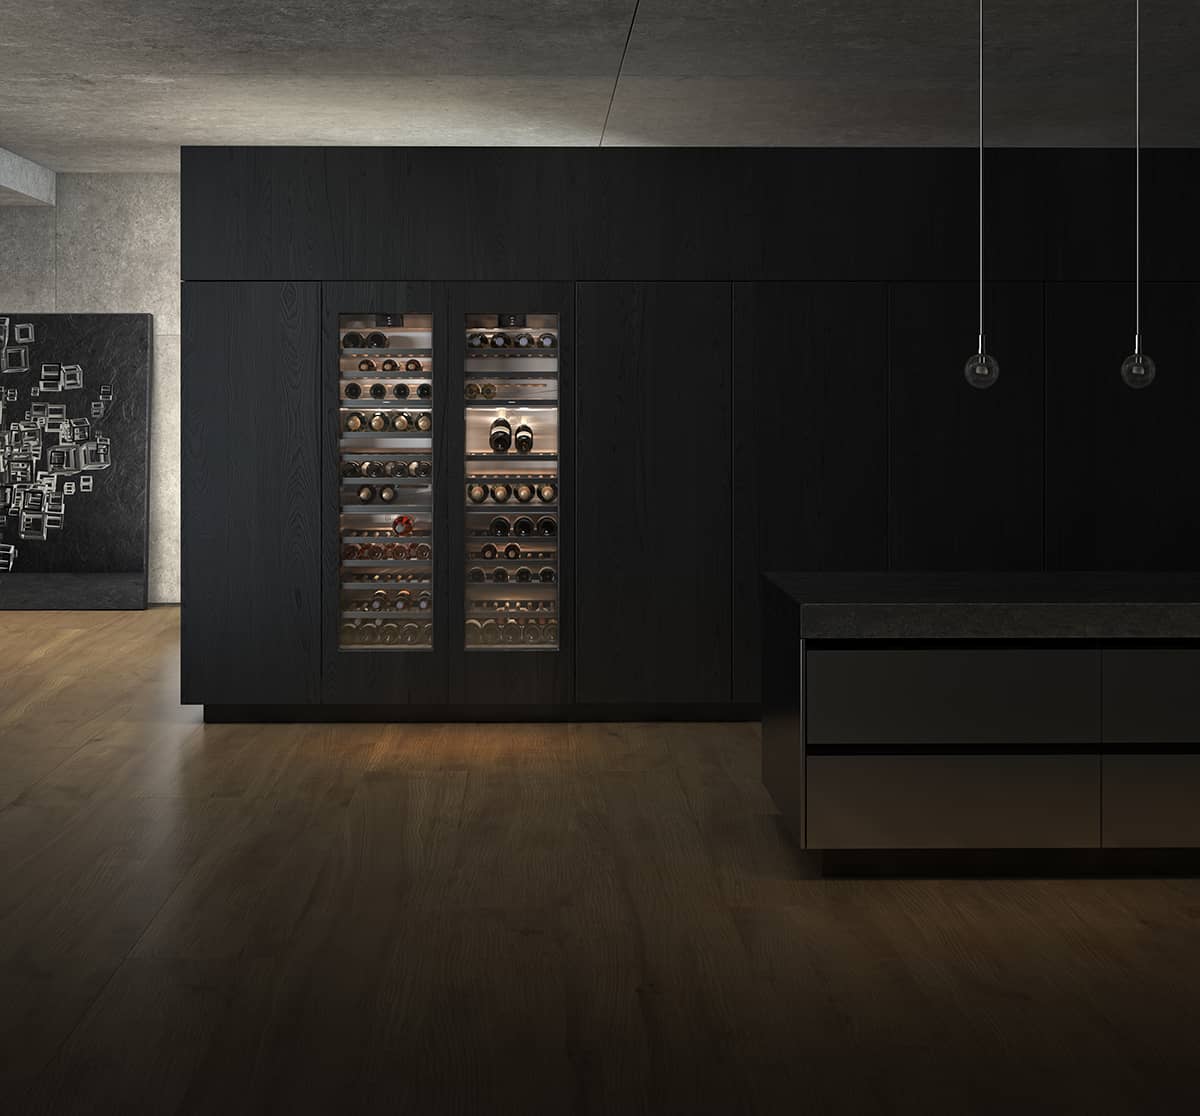 Gaggenau: the art and architecture of appliances